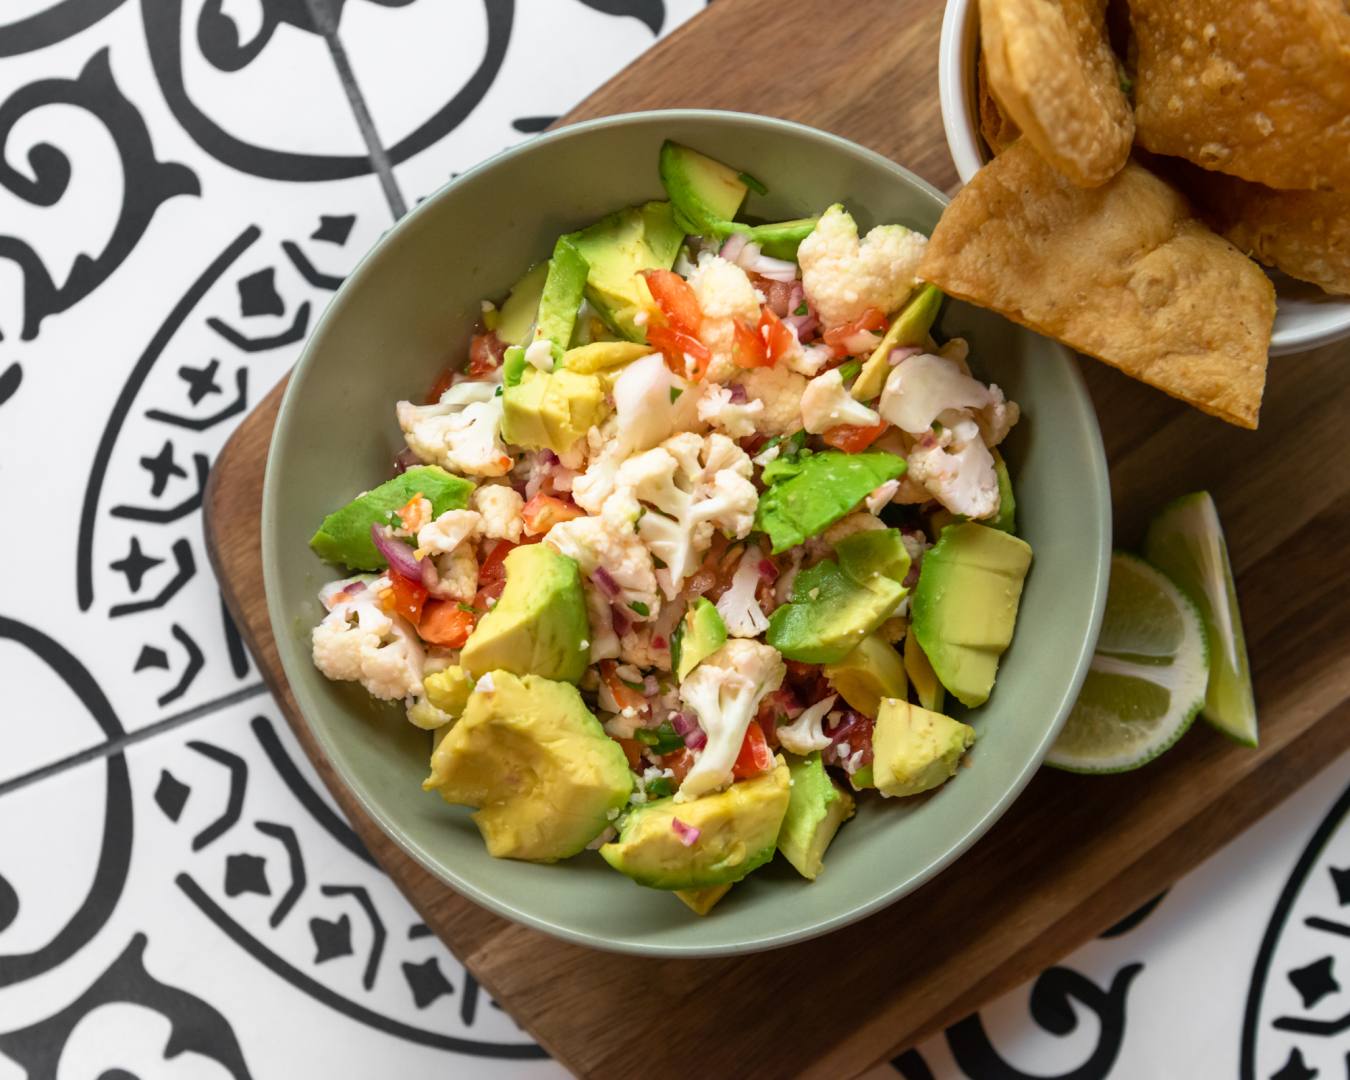 Cauliflower ceviche with tortilla chips and cut limes on wooden cutting board